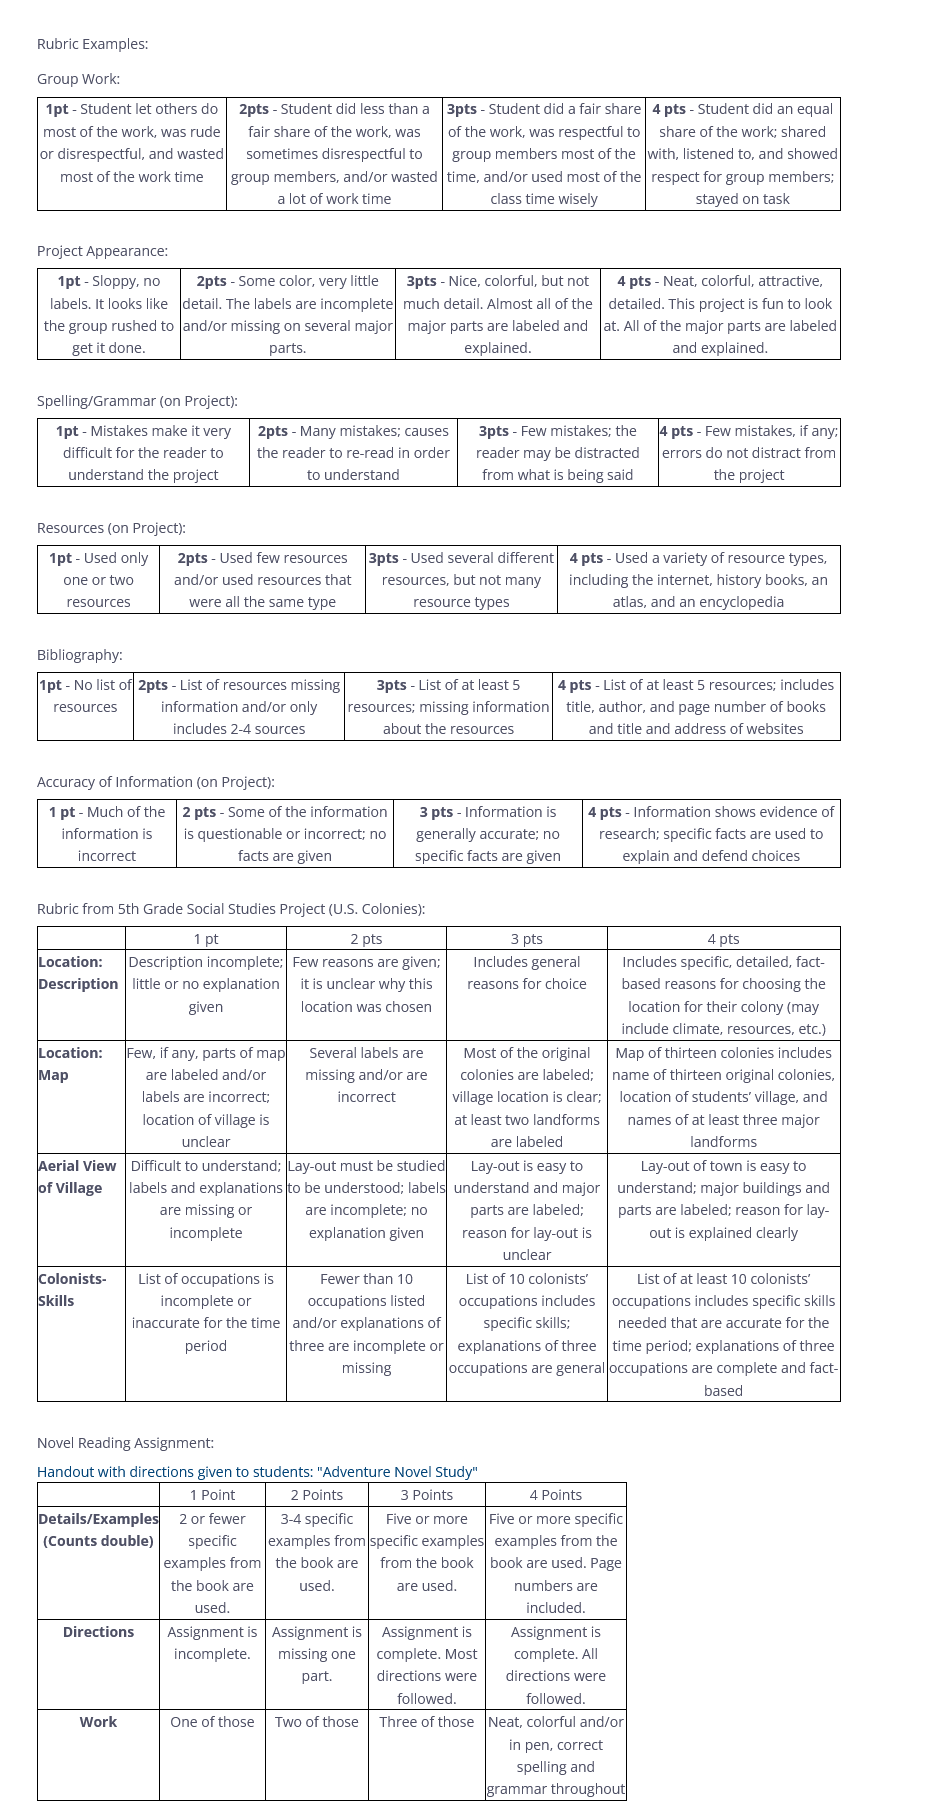 rubric examples chart